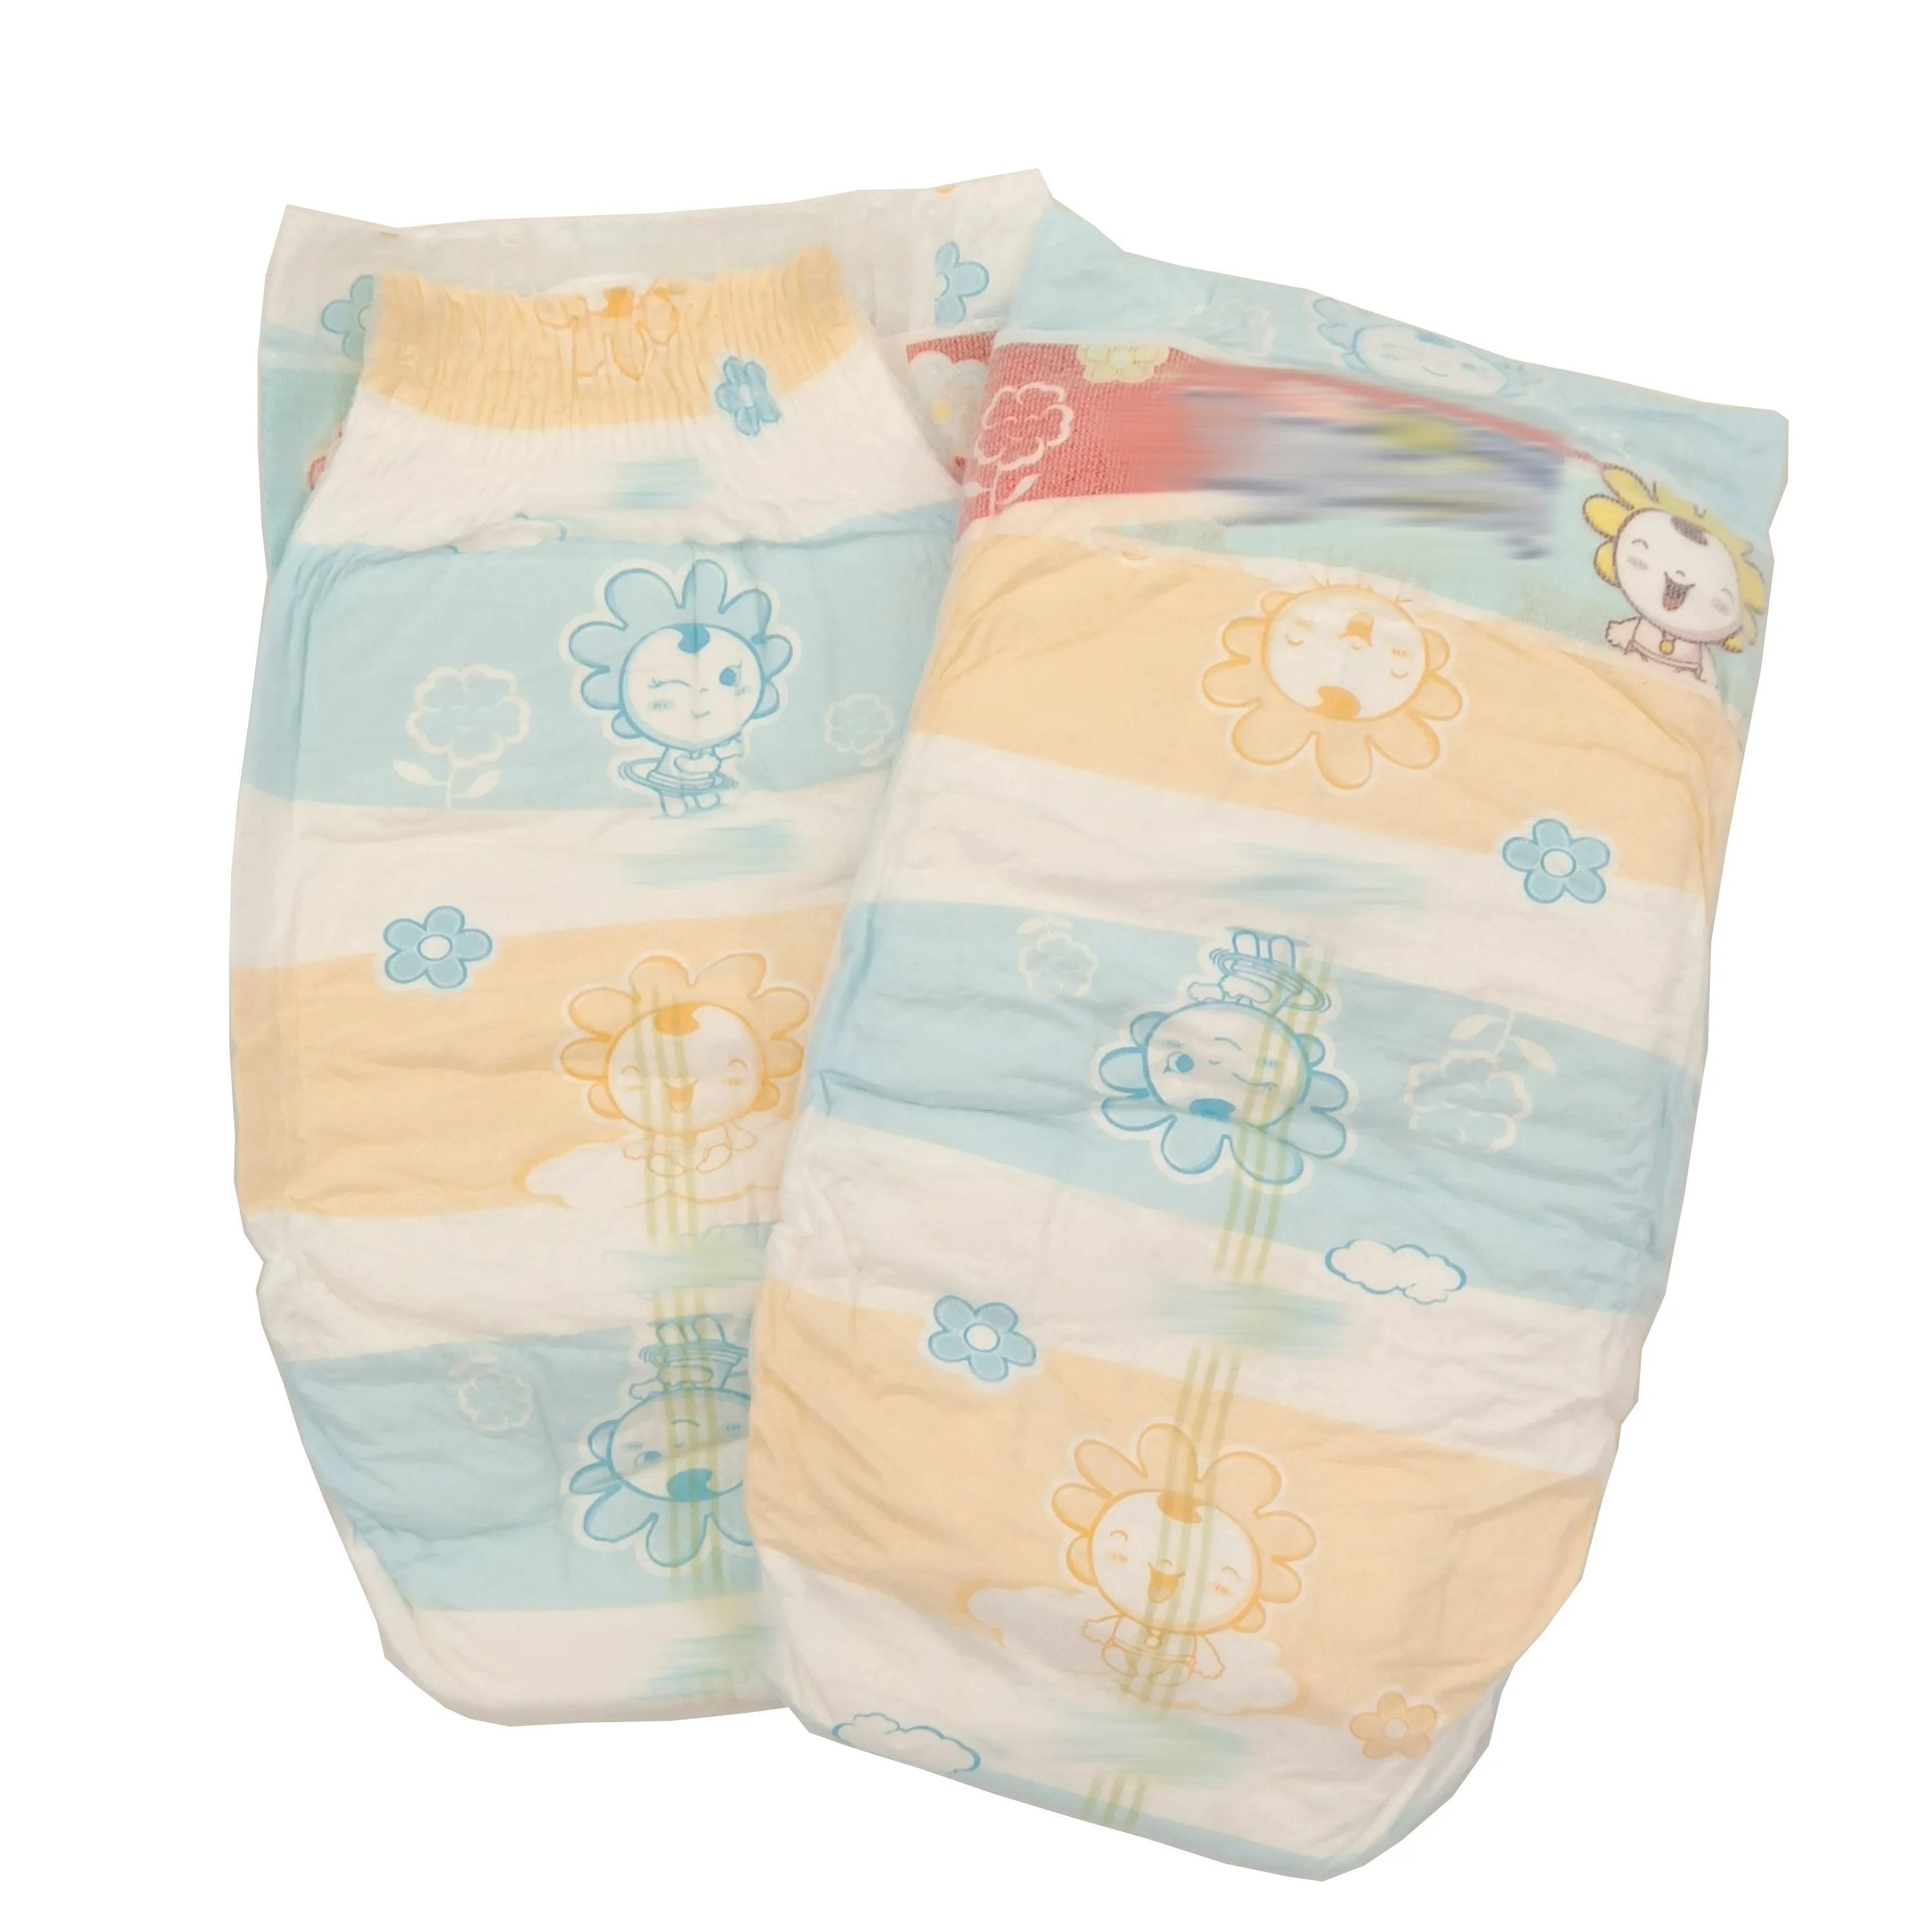 

Manufacture very cheap wholesale grade b baby diaper disposable rejected diaper for baby disposable diaper L XL in bales, Printed color